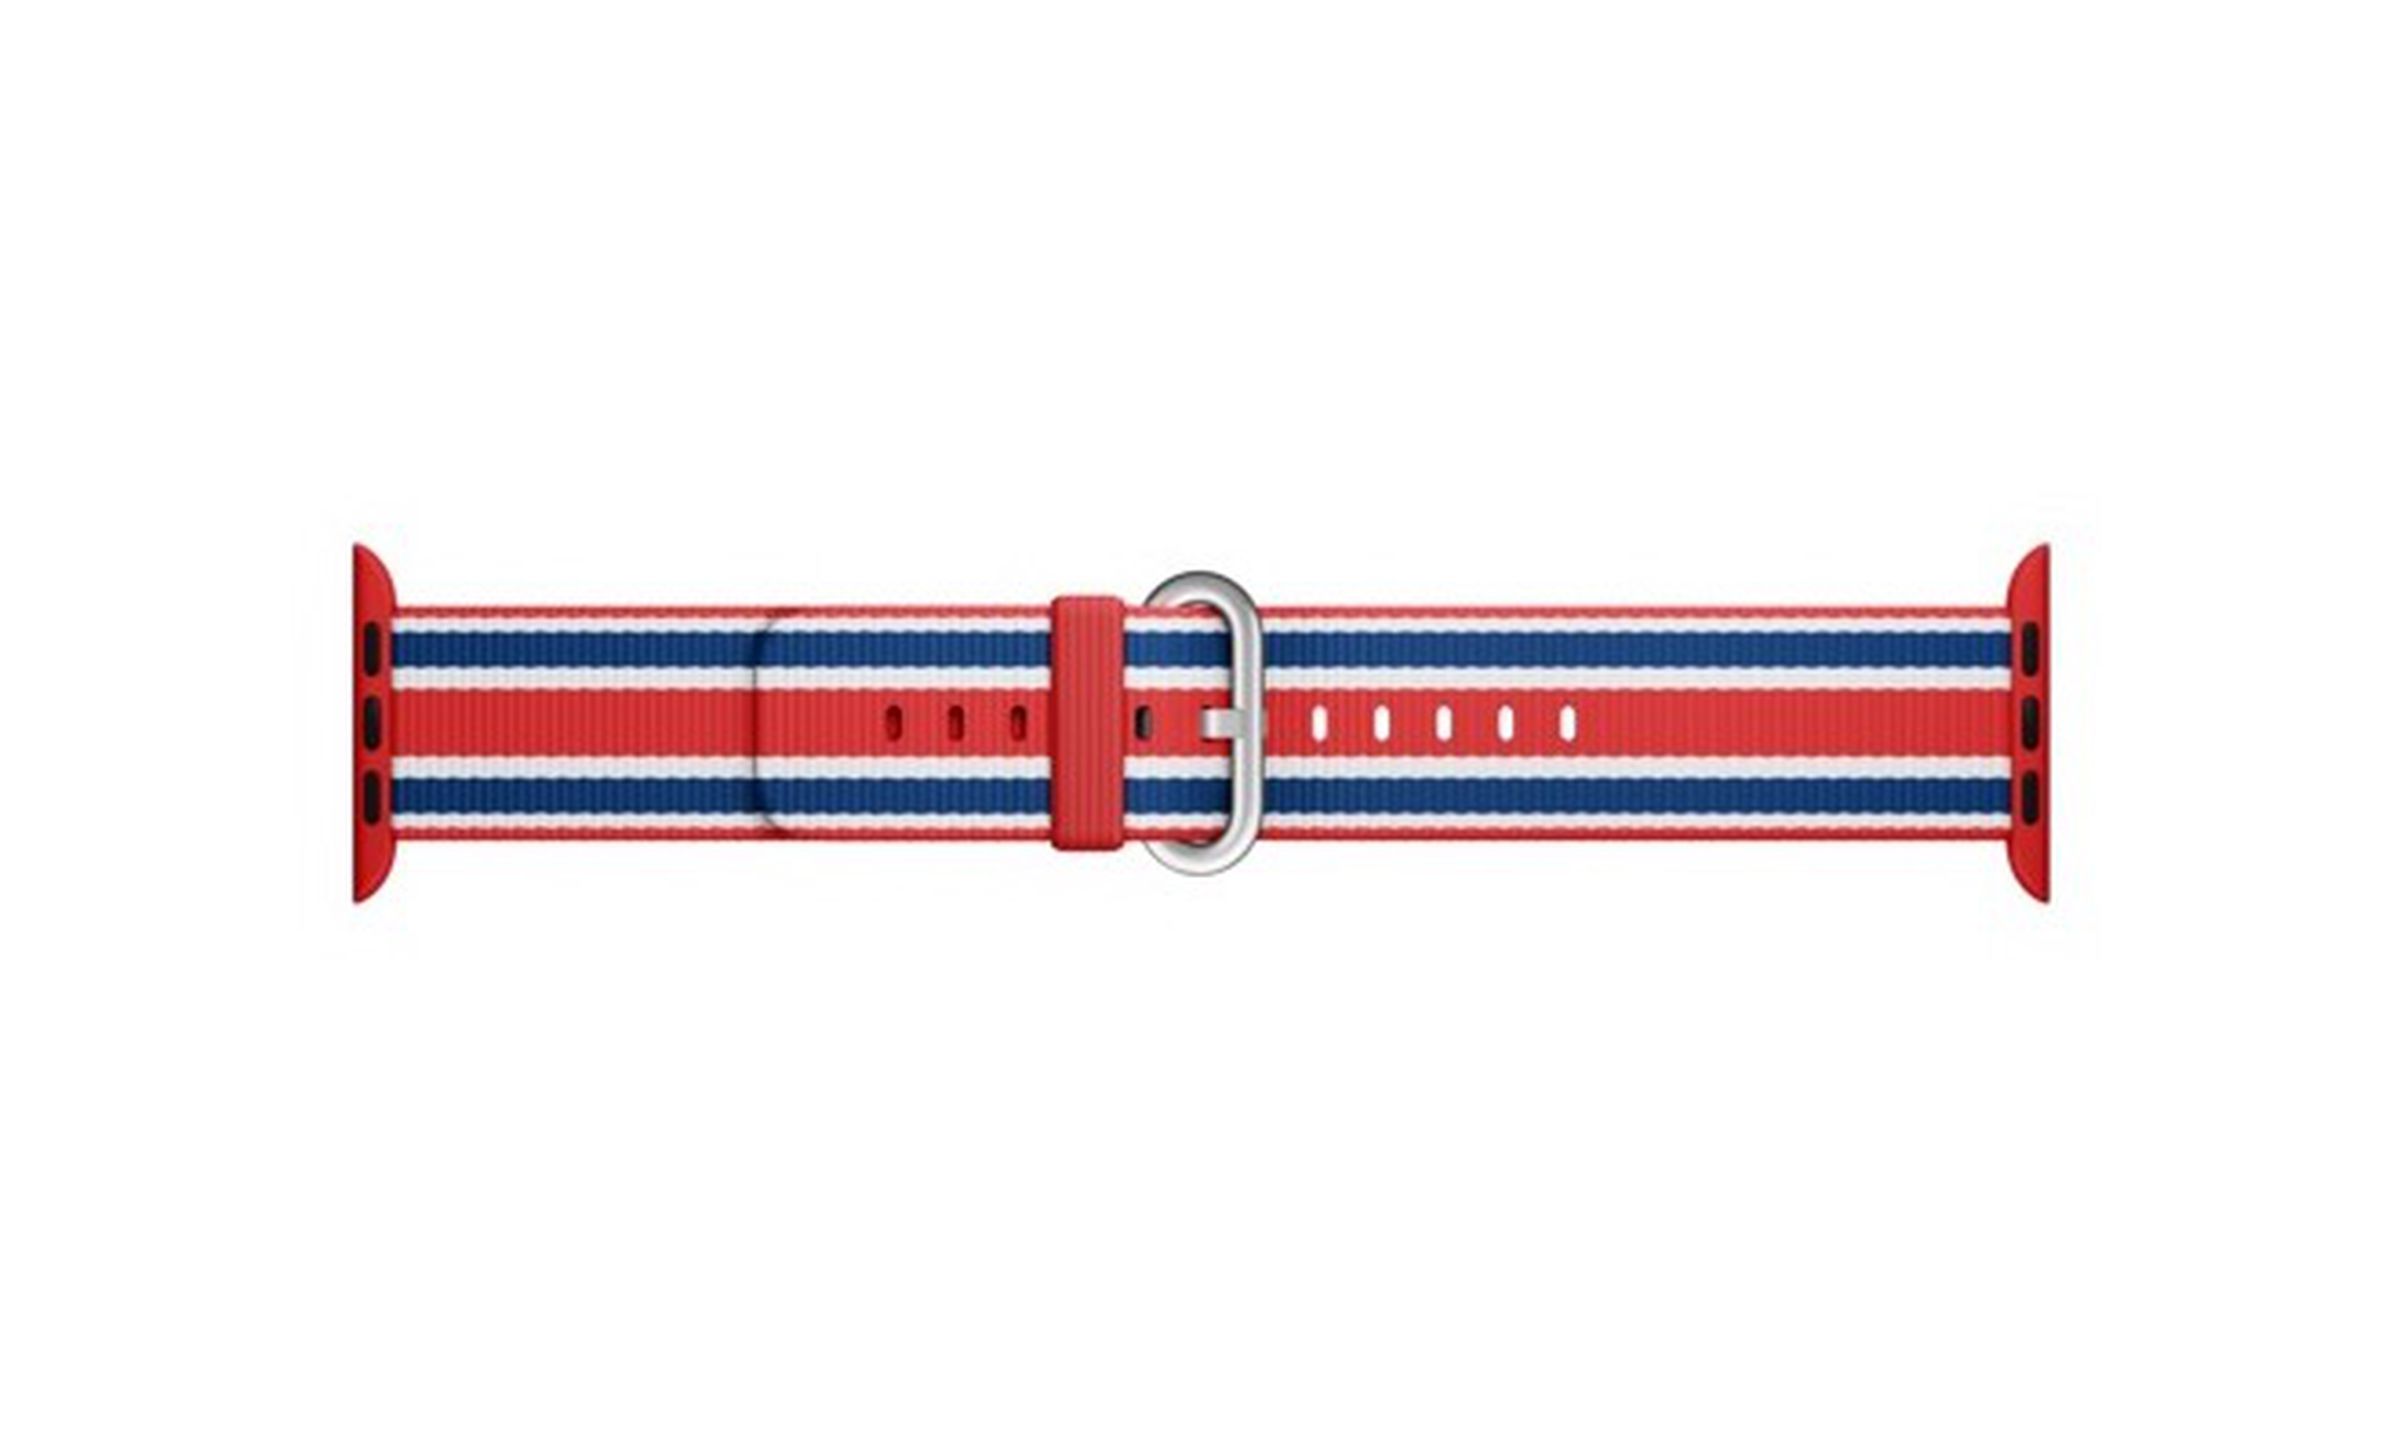 Apple Watch Olympic bands